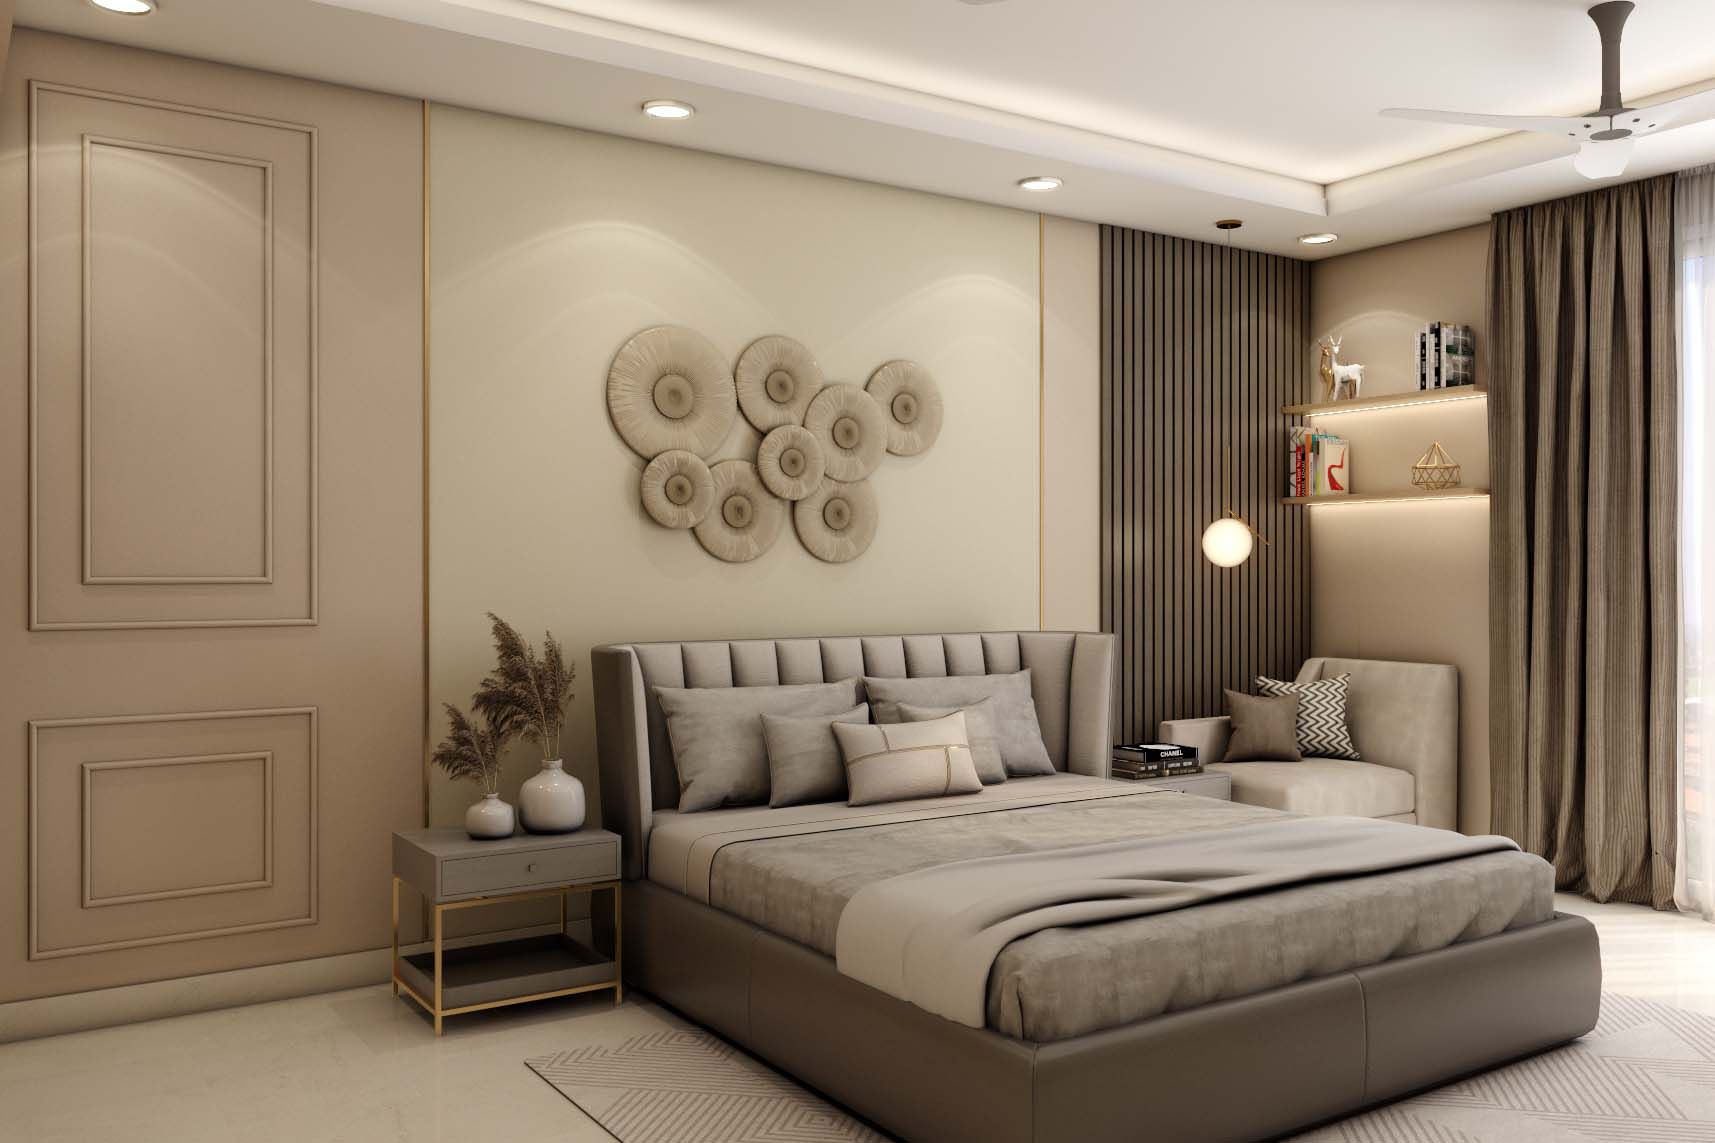 Spacious Modern Master Bedroom Design In Grey And Beige Colour